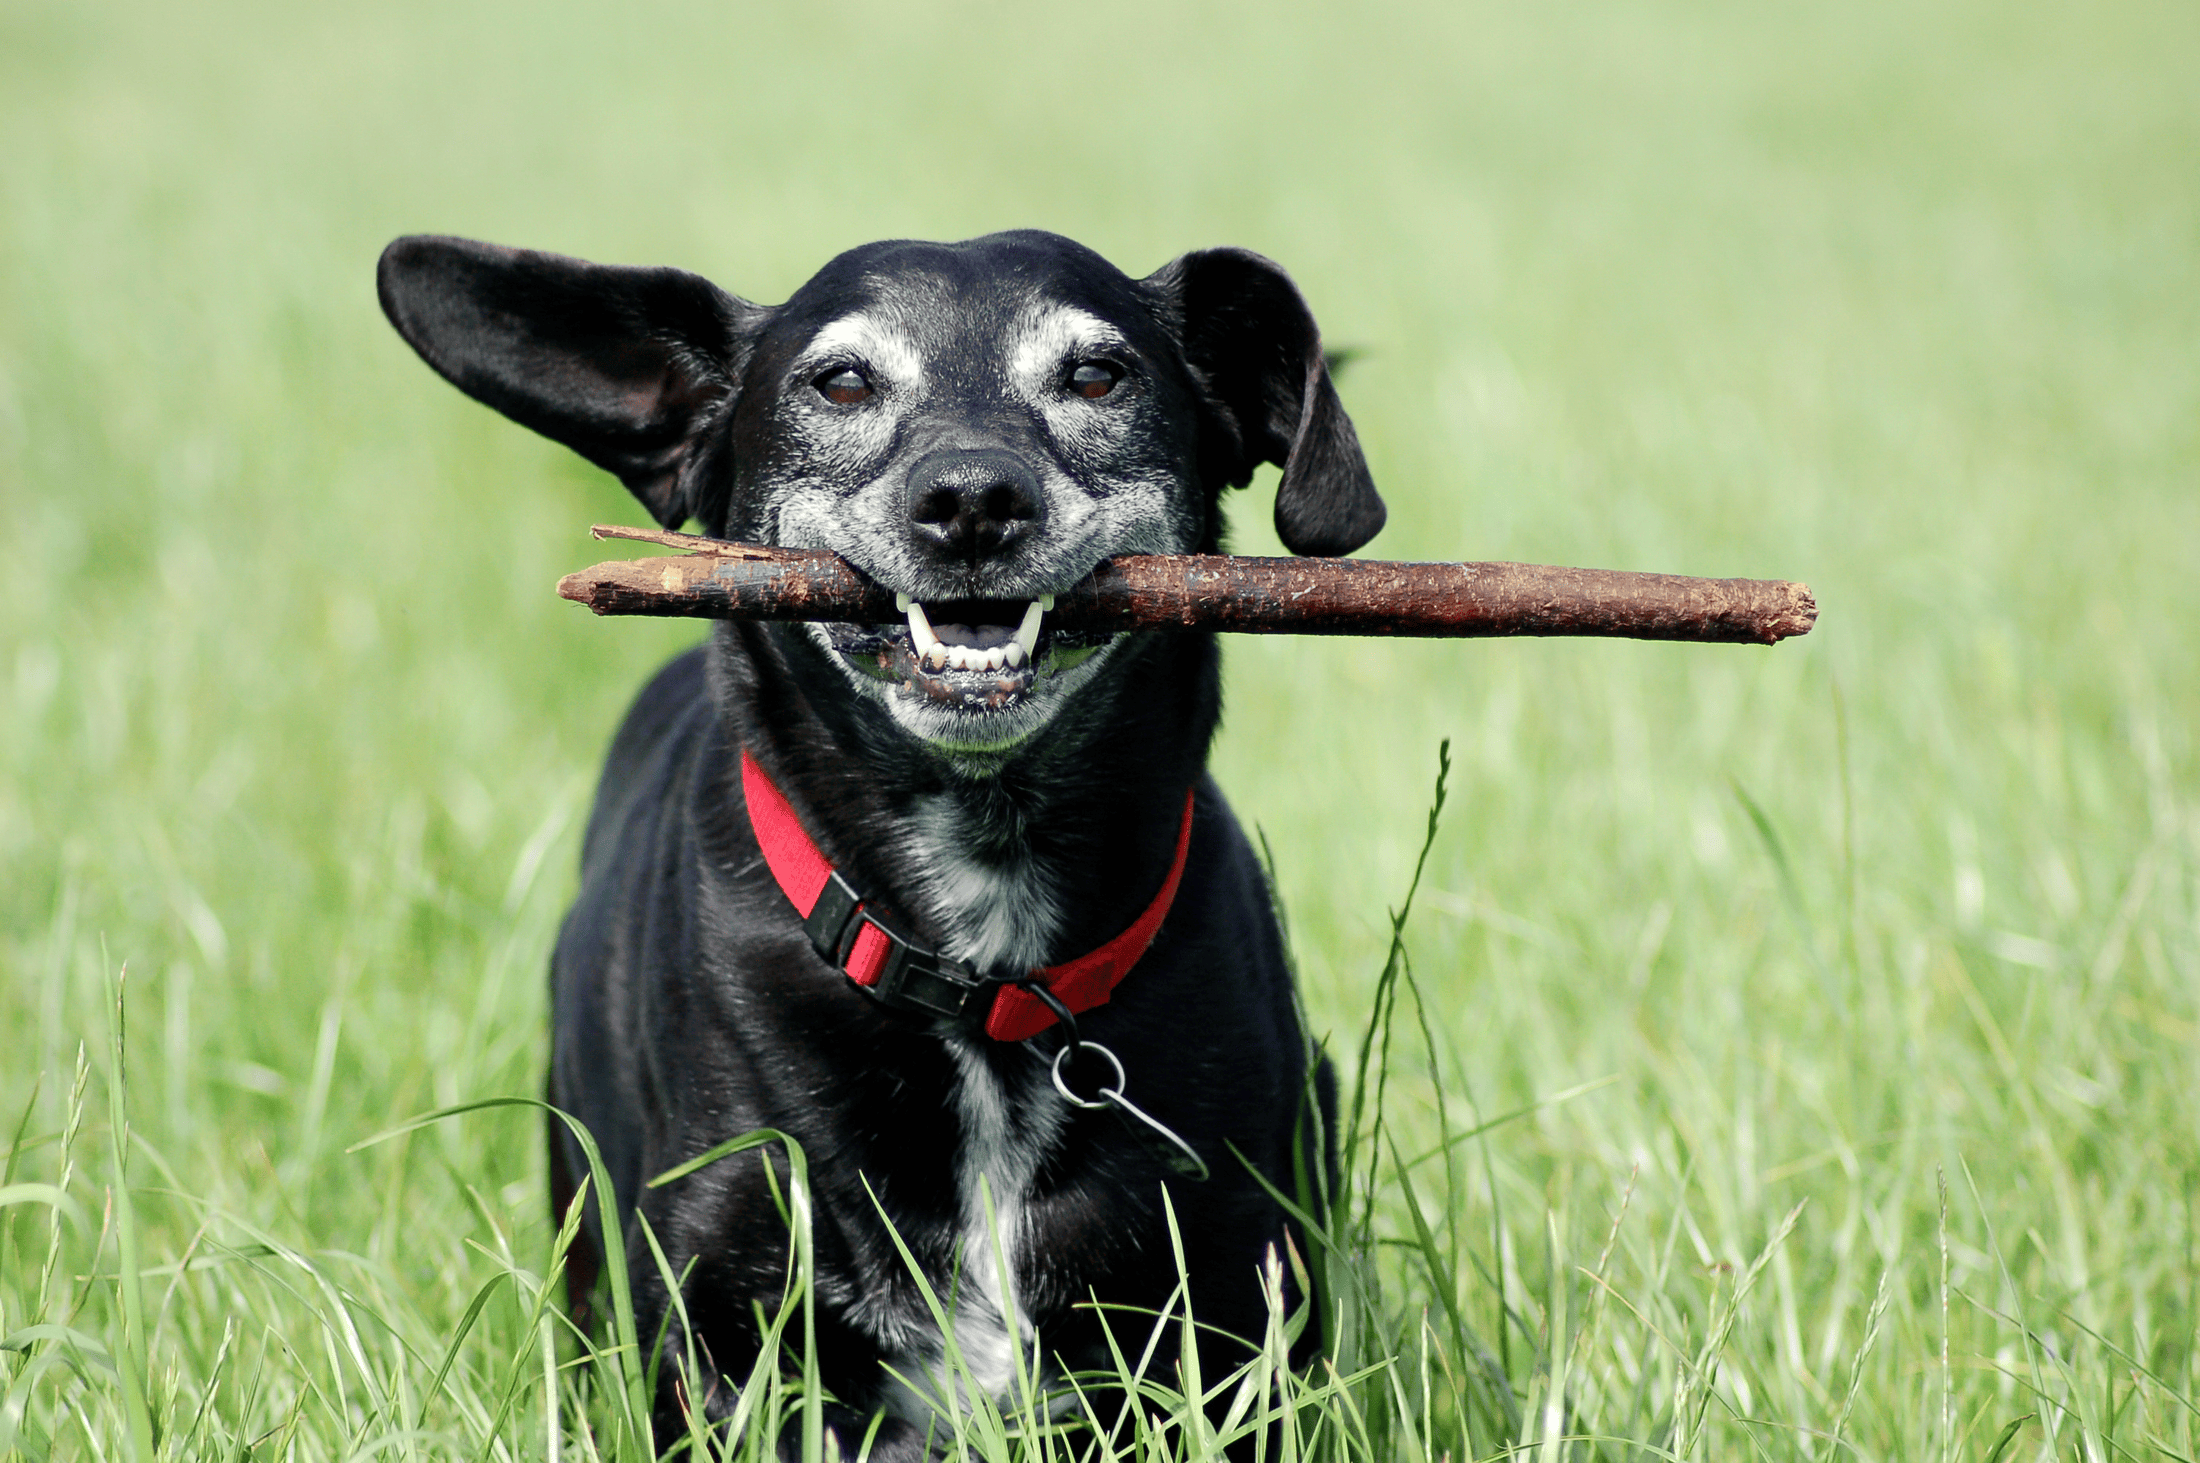 Older dogs get the dog zoomies too when they have excess energy or nervous energy they need to release.